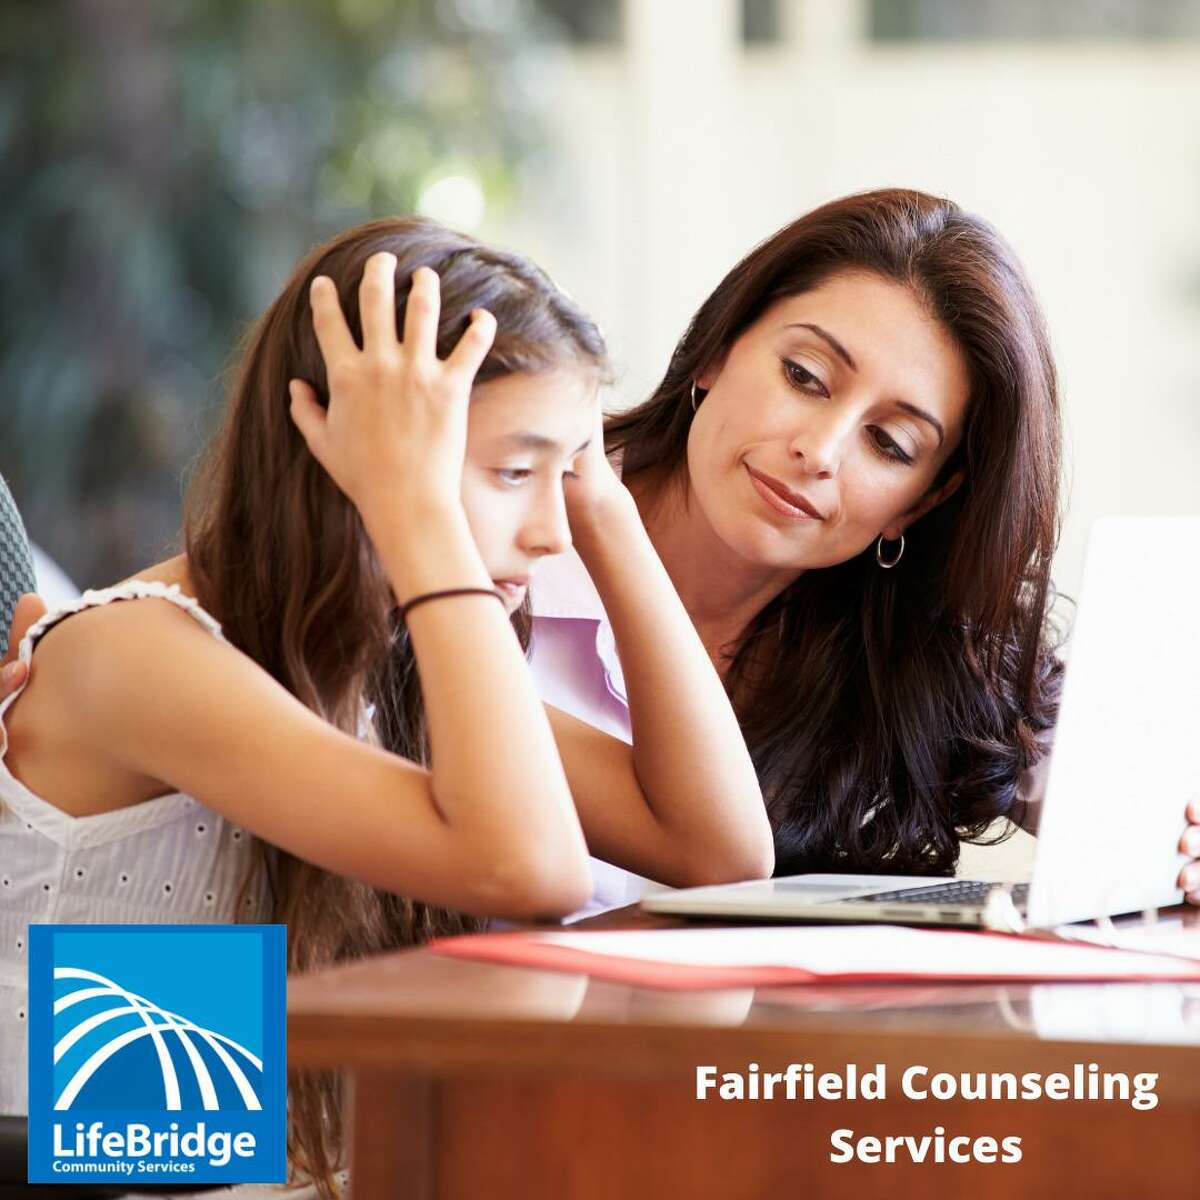 LifeBridge's Community Services, Fairfield Counseling Services, has started to offer a series of eight free workshops for parents, and caregivers at the Fairfield Public Library from 6 to 7:30 p.m., every Wednesday, through June 15. A photo is shown for the events.